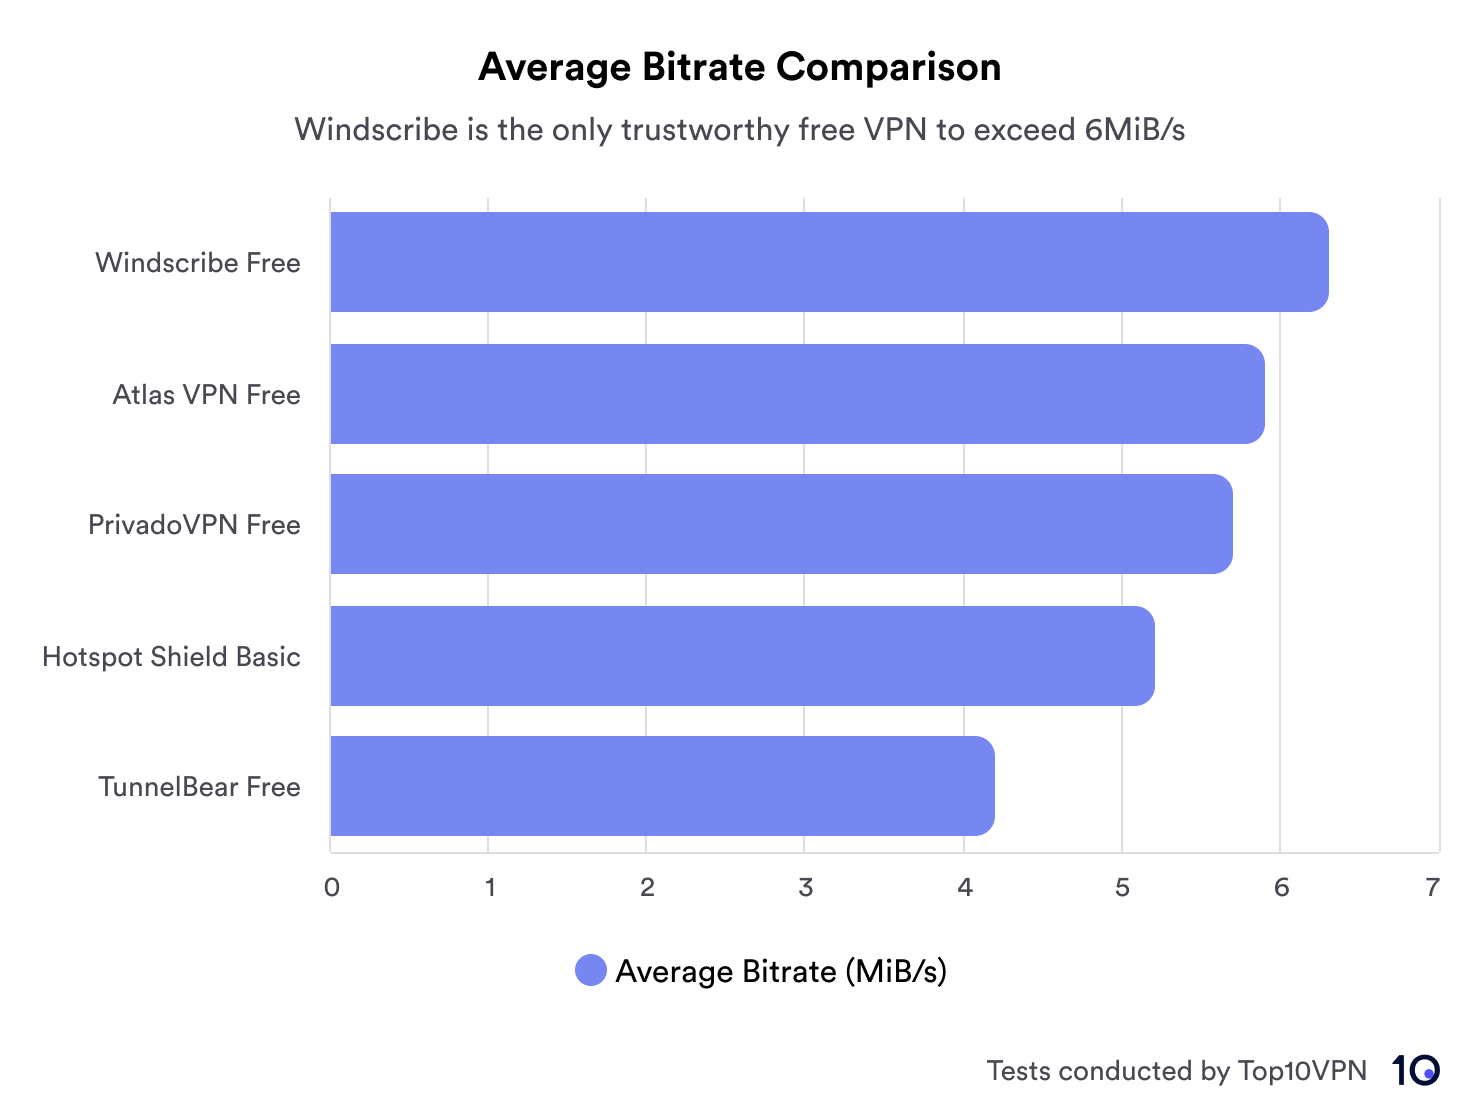 Bar chart comparing the average bitrates of free torrenting VPNs